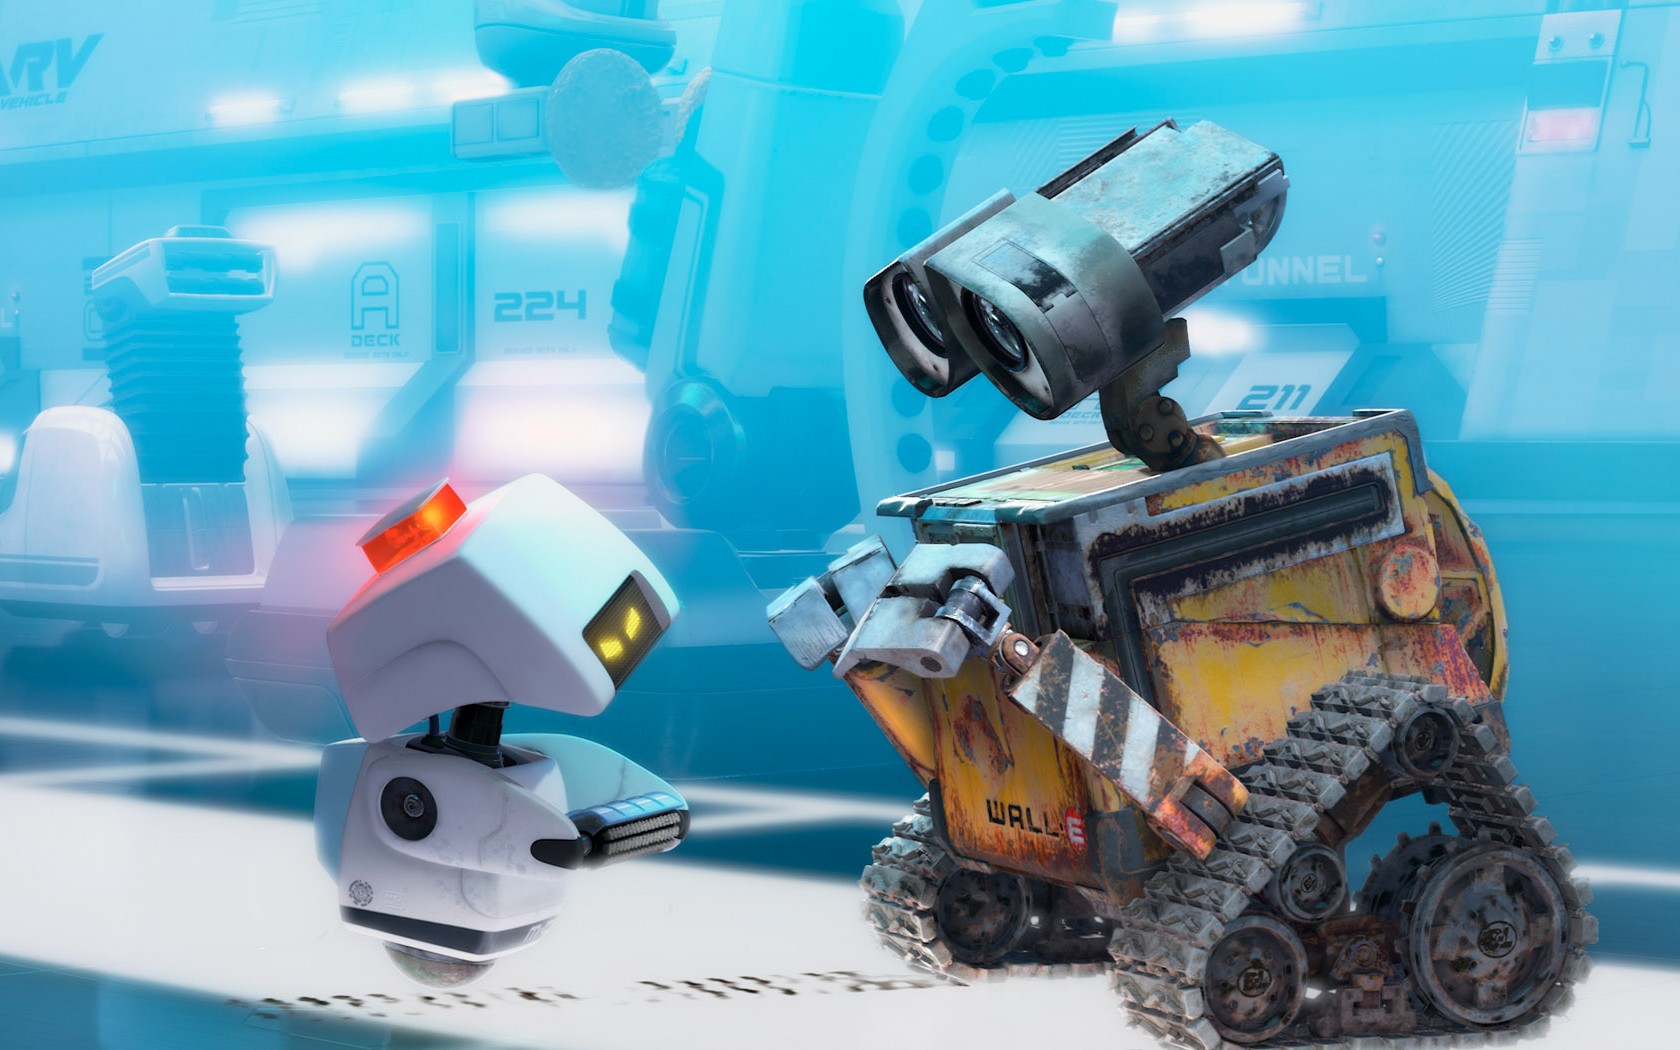 General 1680x1050 WALL-E robot movies animated movies Pixar Animation Studios cyan cyan background science fiction